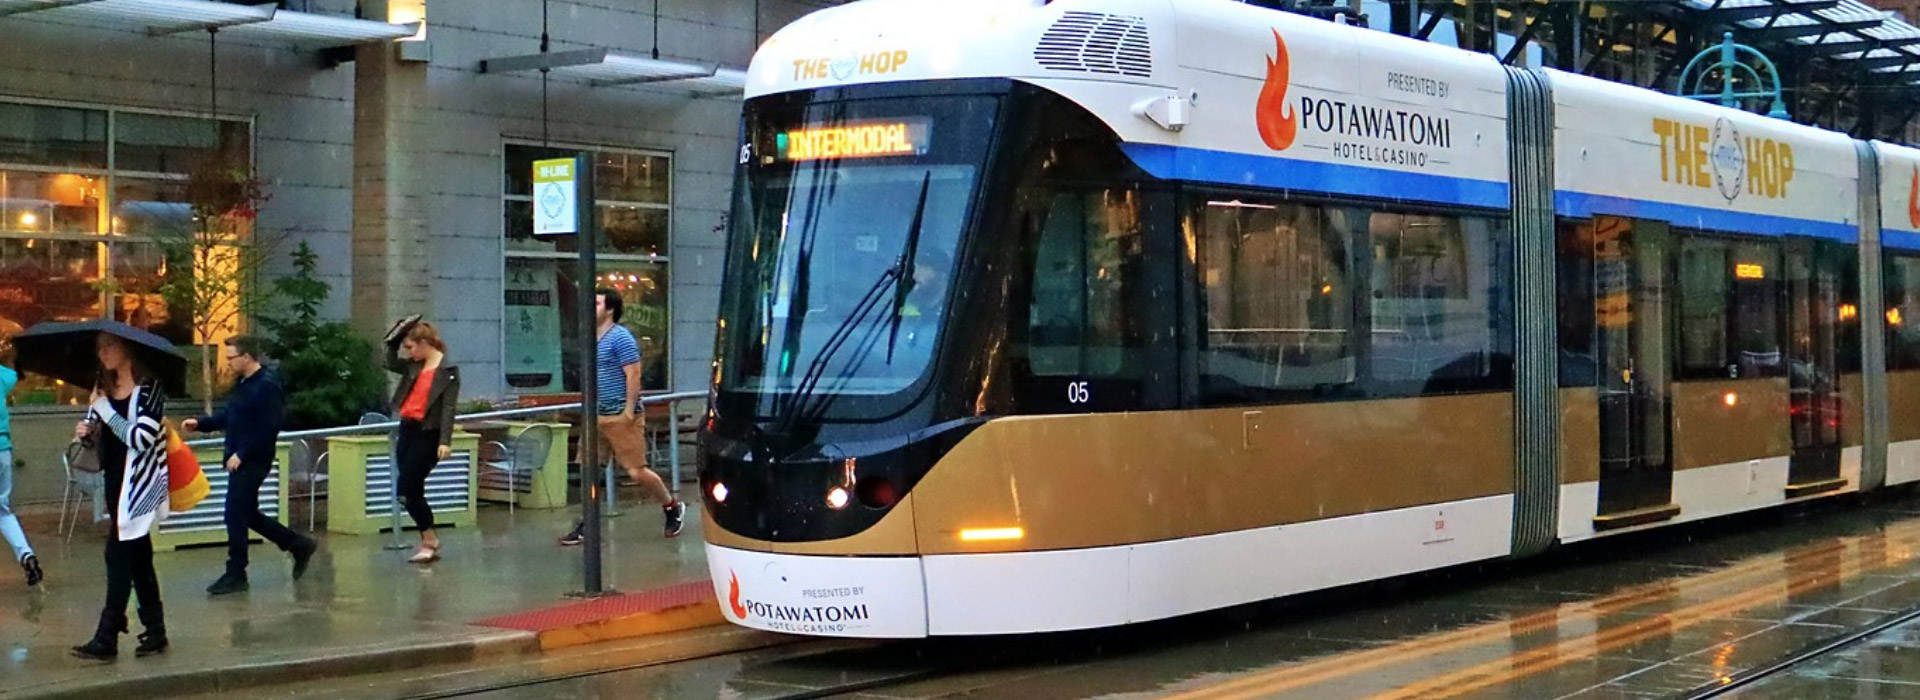 A streetcar parked at a station